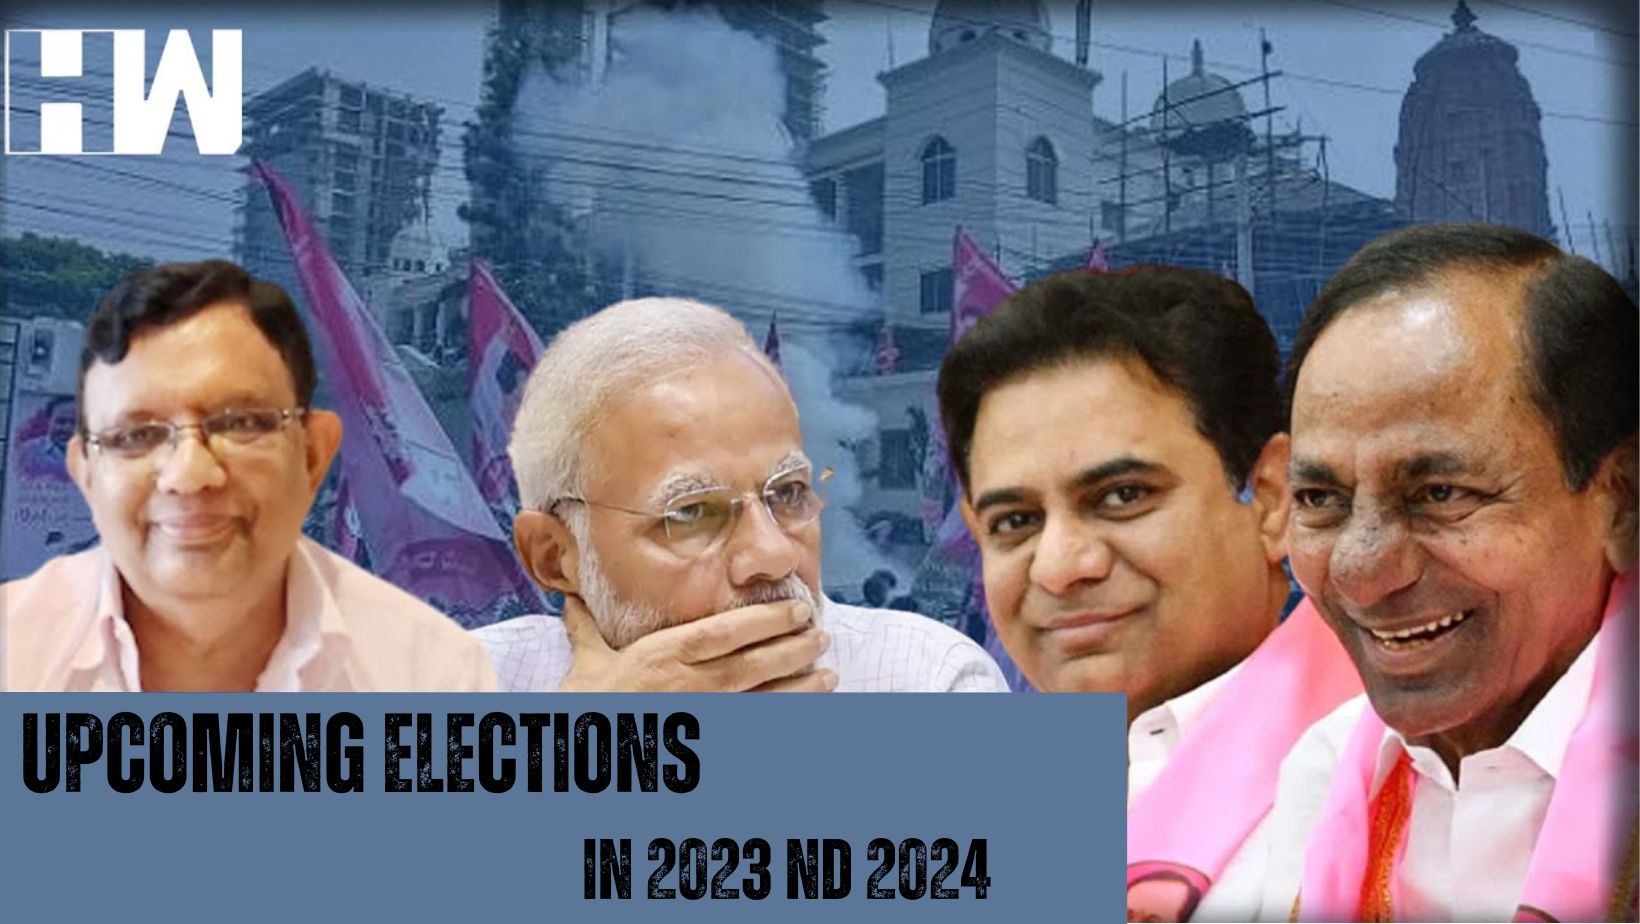 The Landscape of Future Elections 2023 and  2024